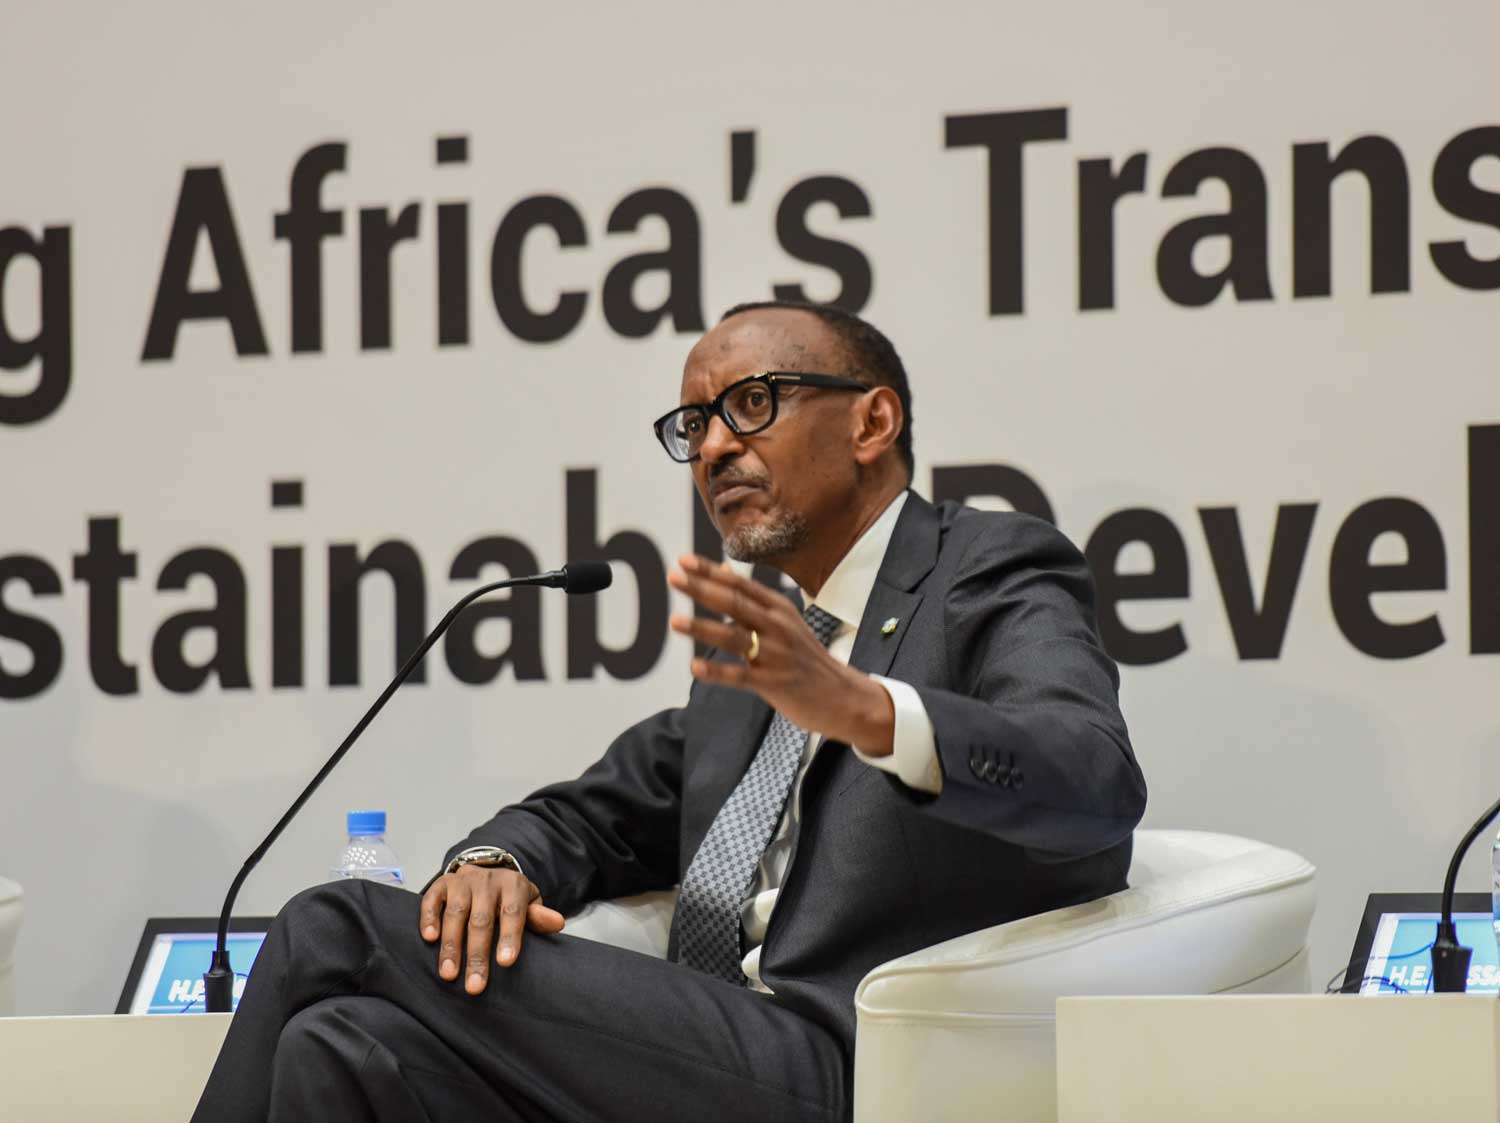 Importing Commodities Africa Has Should Be Termed ‘Illicit Flow’- Kagame